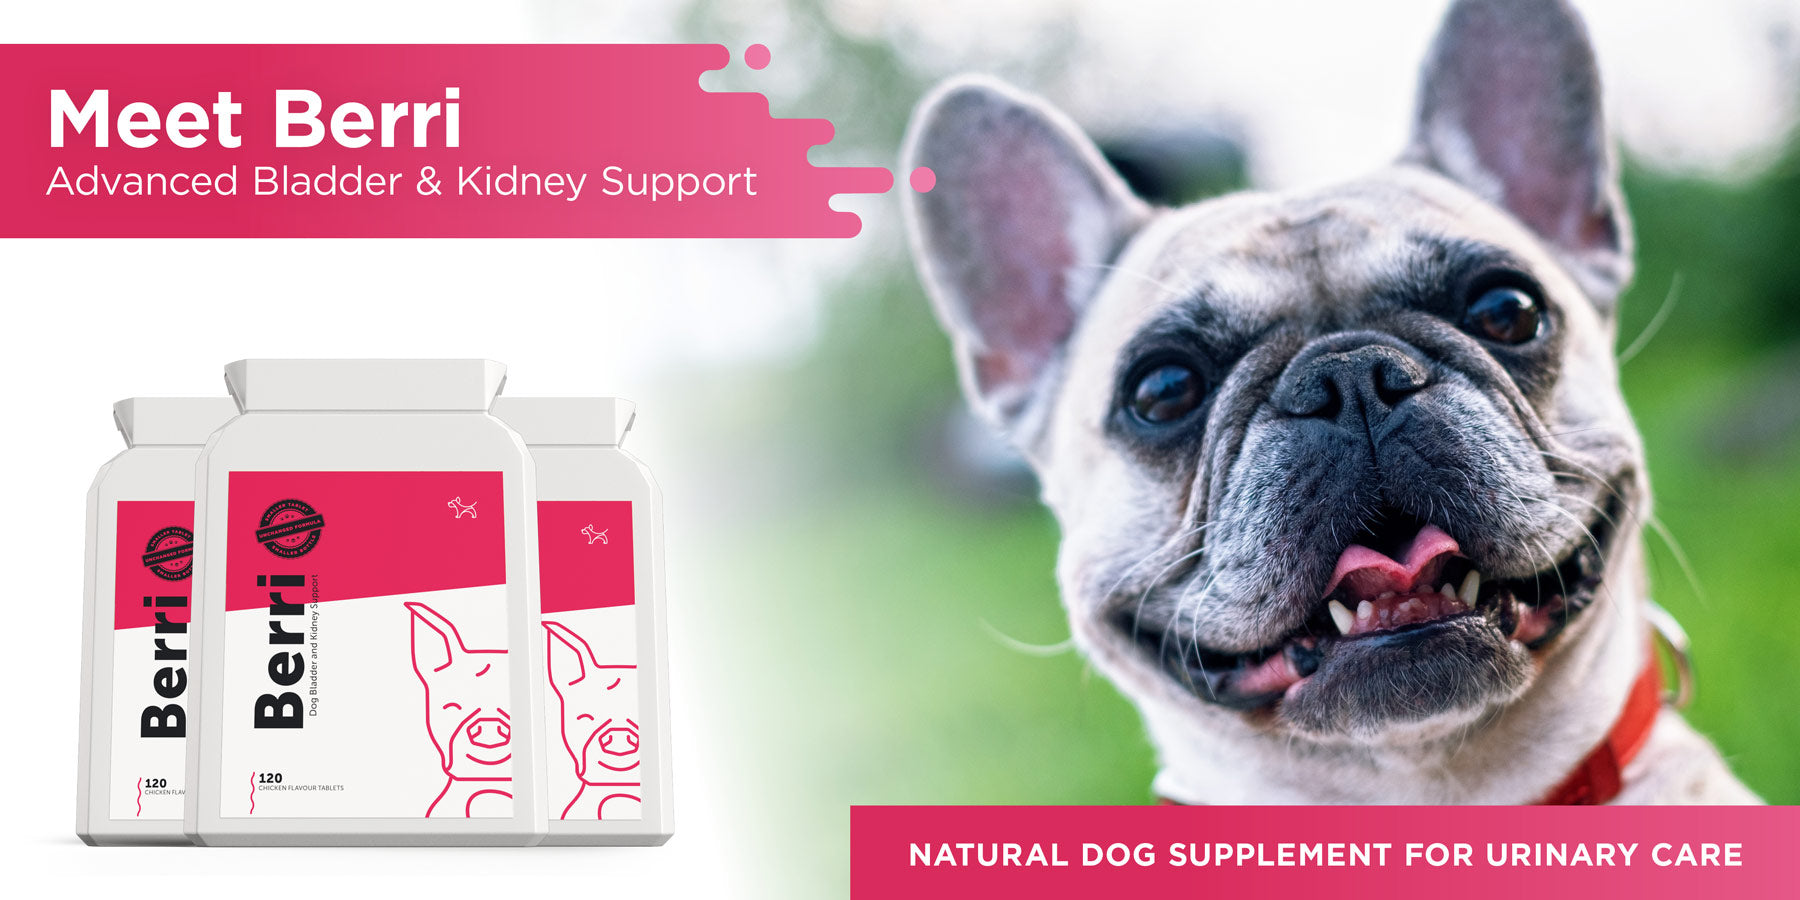 Berri advanced bladder and kidney supplement tablets for dogs suffering from urinary tract infections